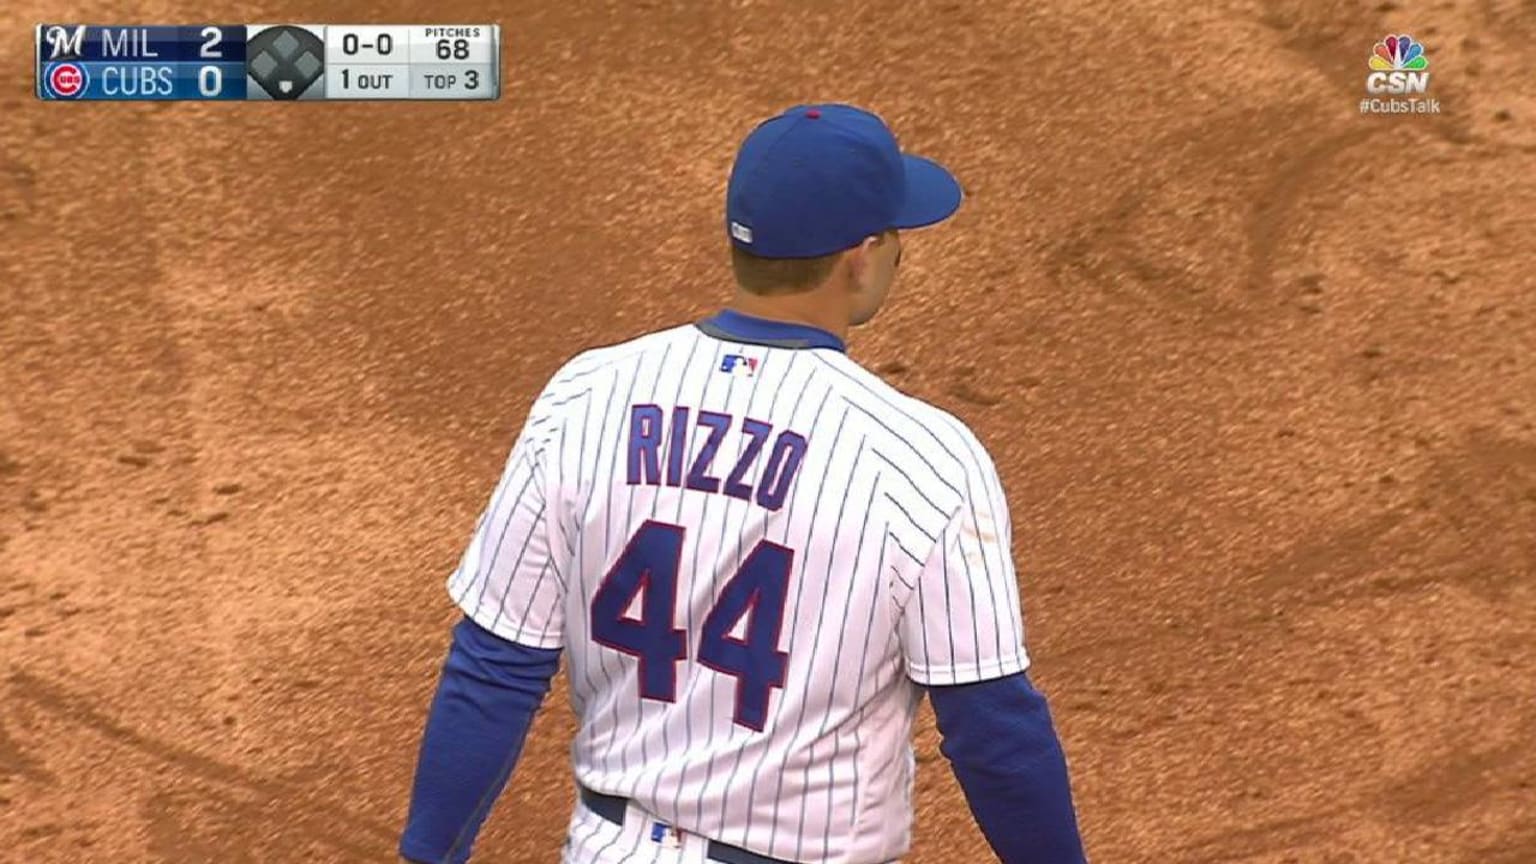 Yankees send Anthony Rizzo to IL, promote Ronald Guzmán